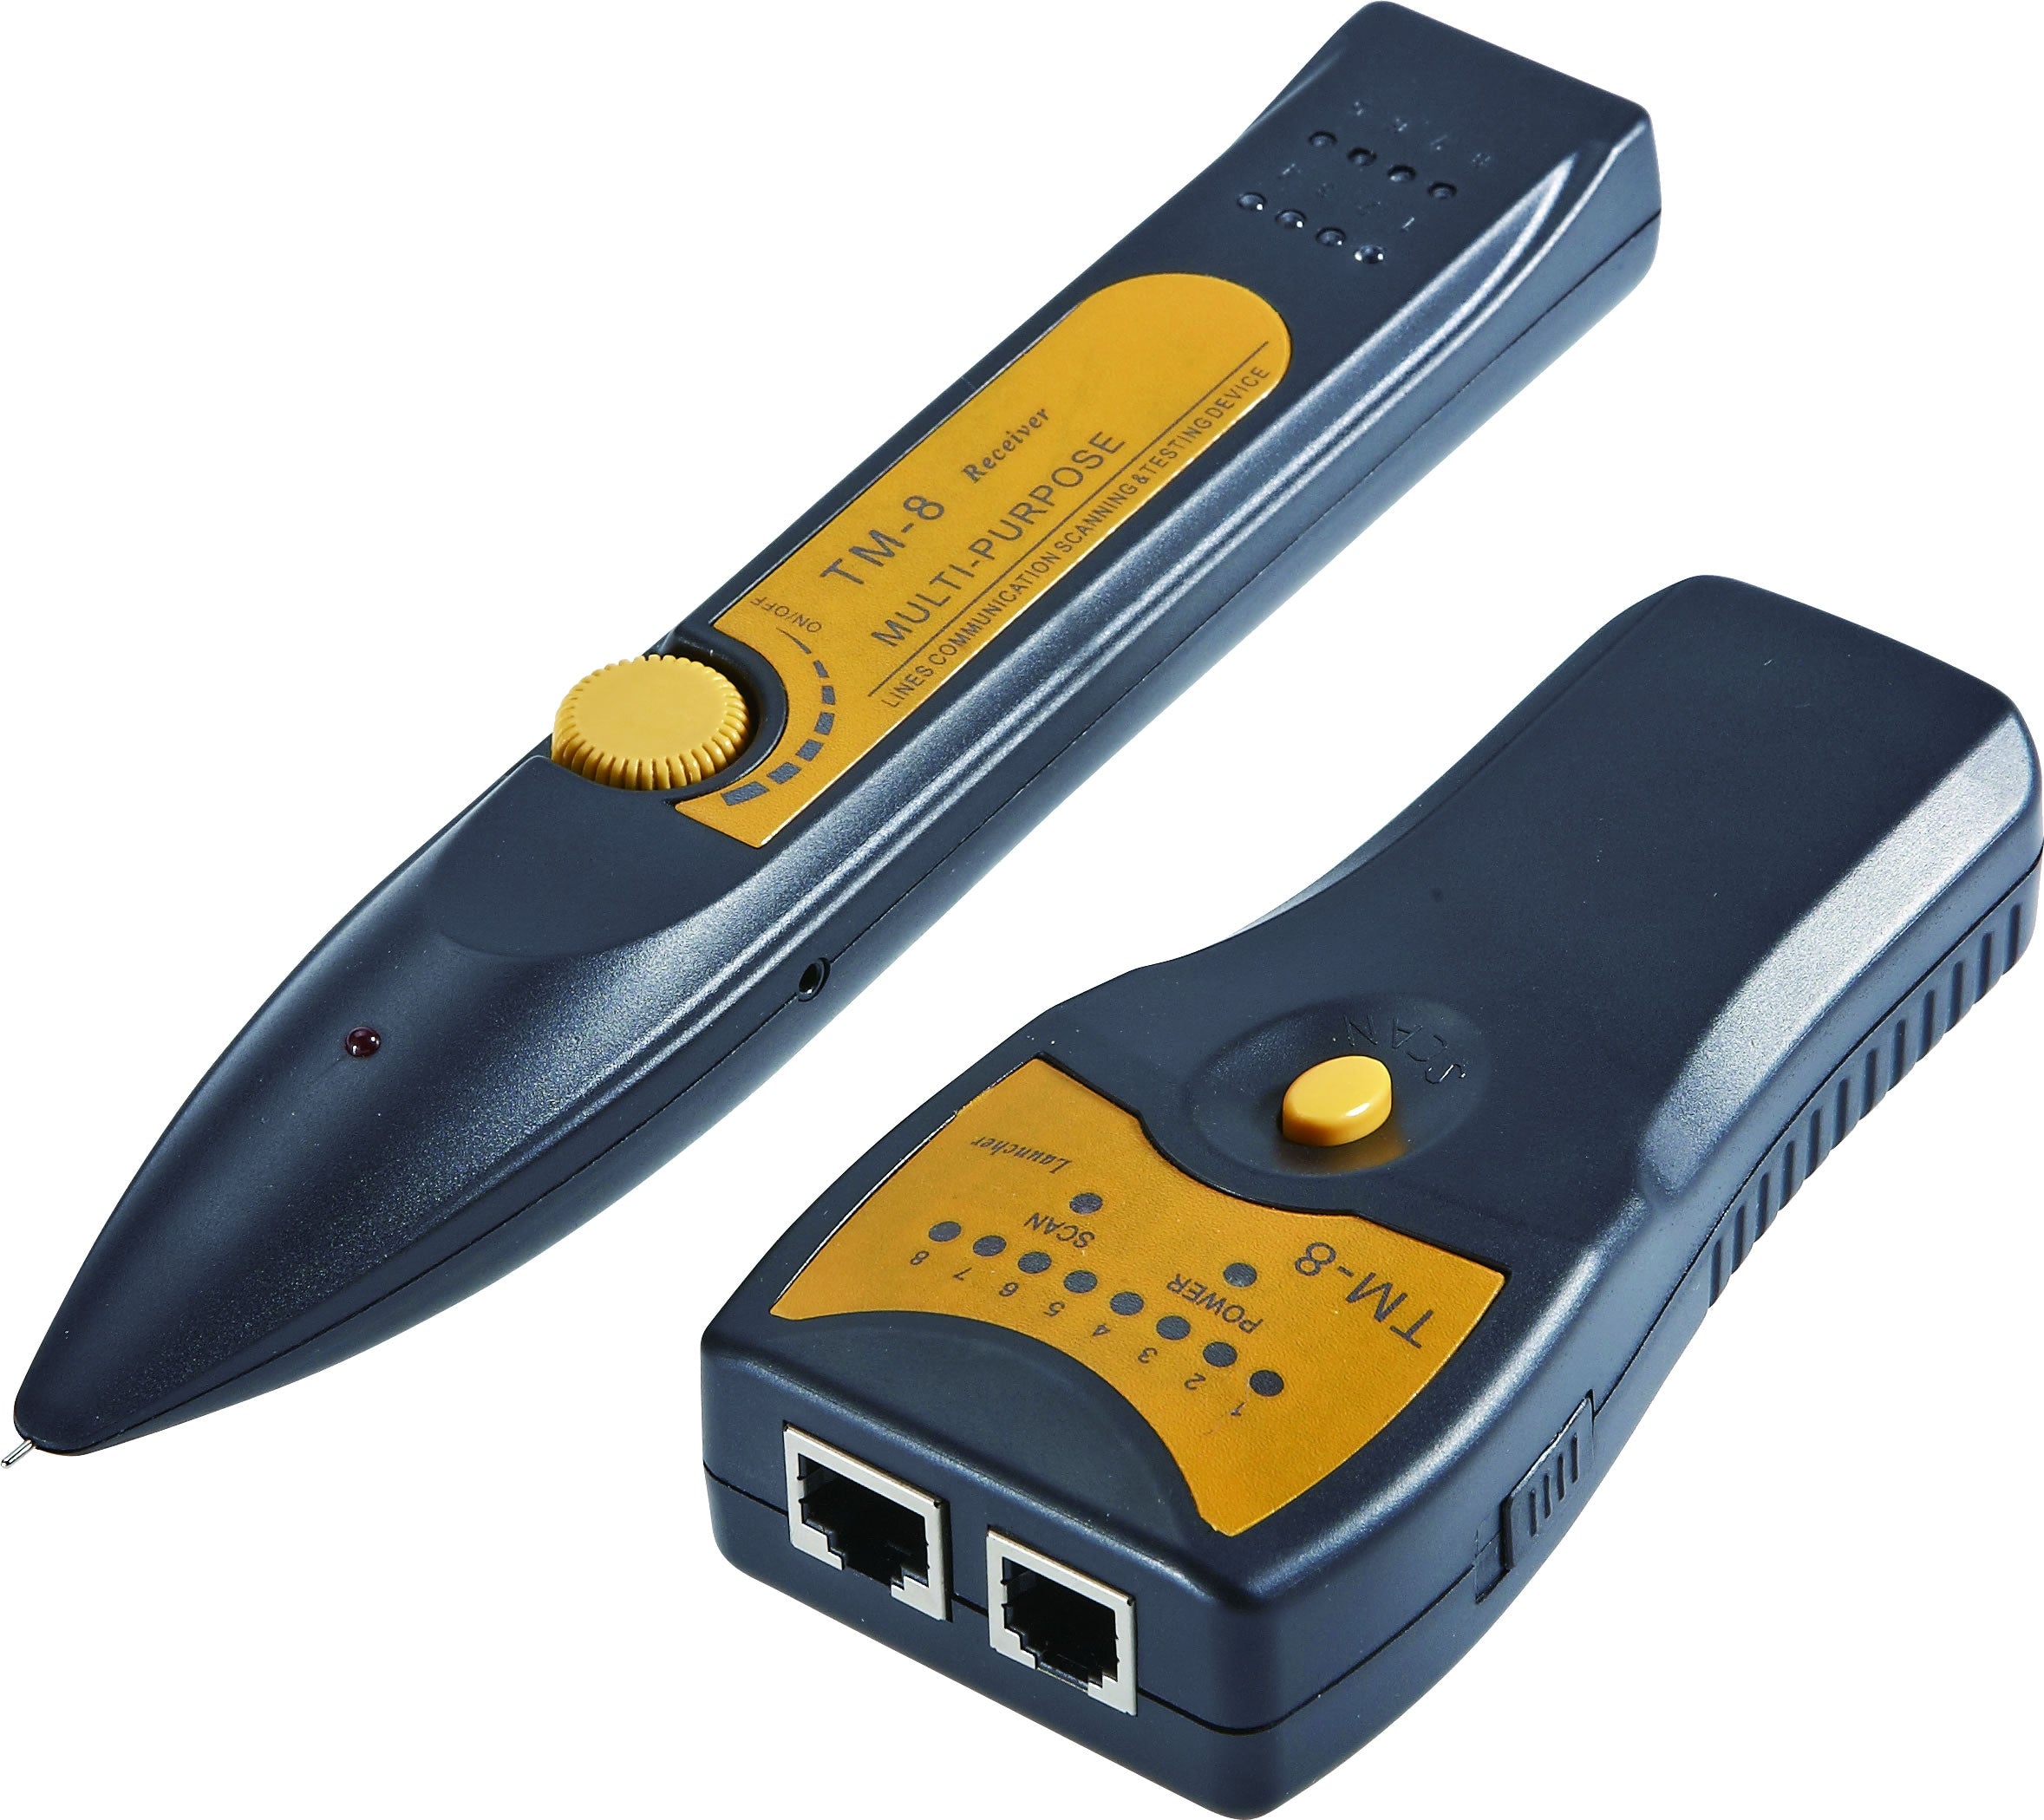 50-6218 Multi-Function Cable Tester with Wire Tracker